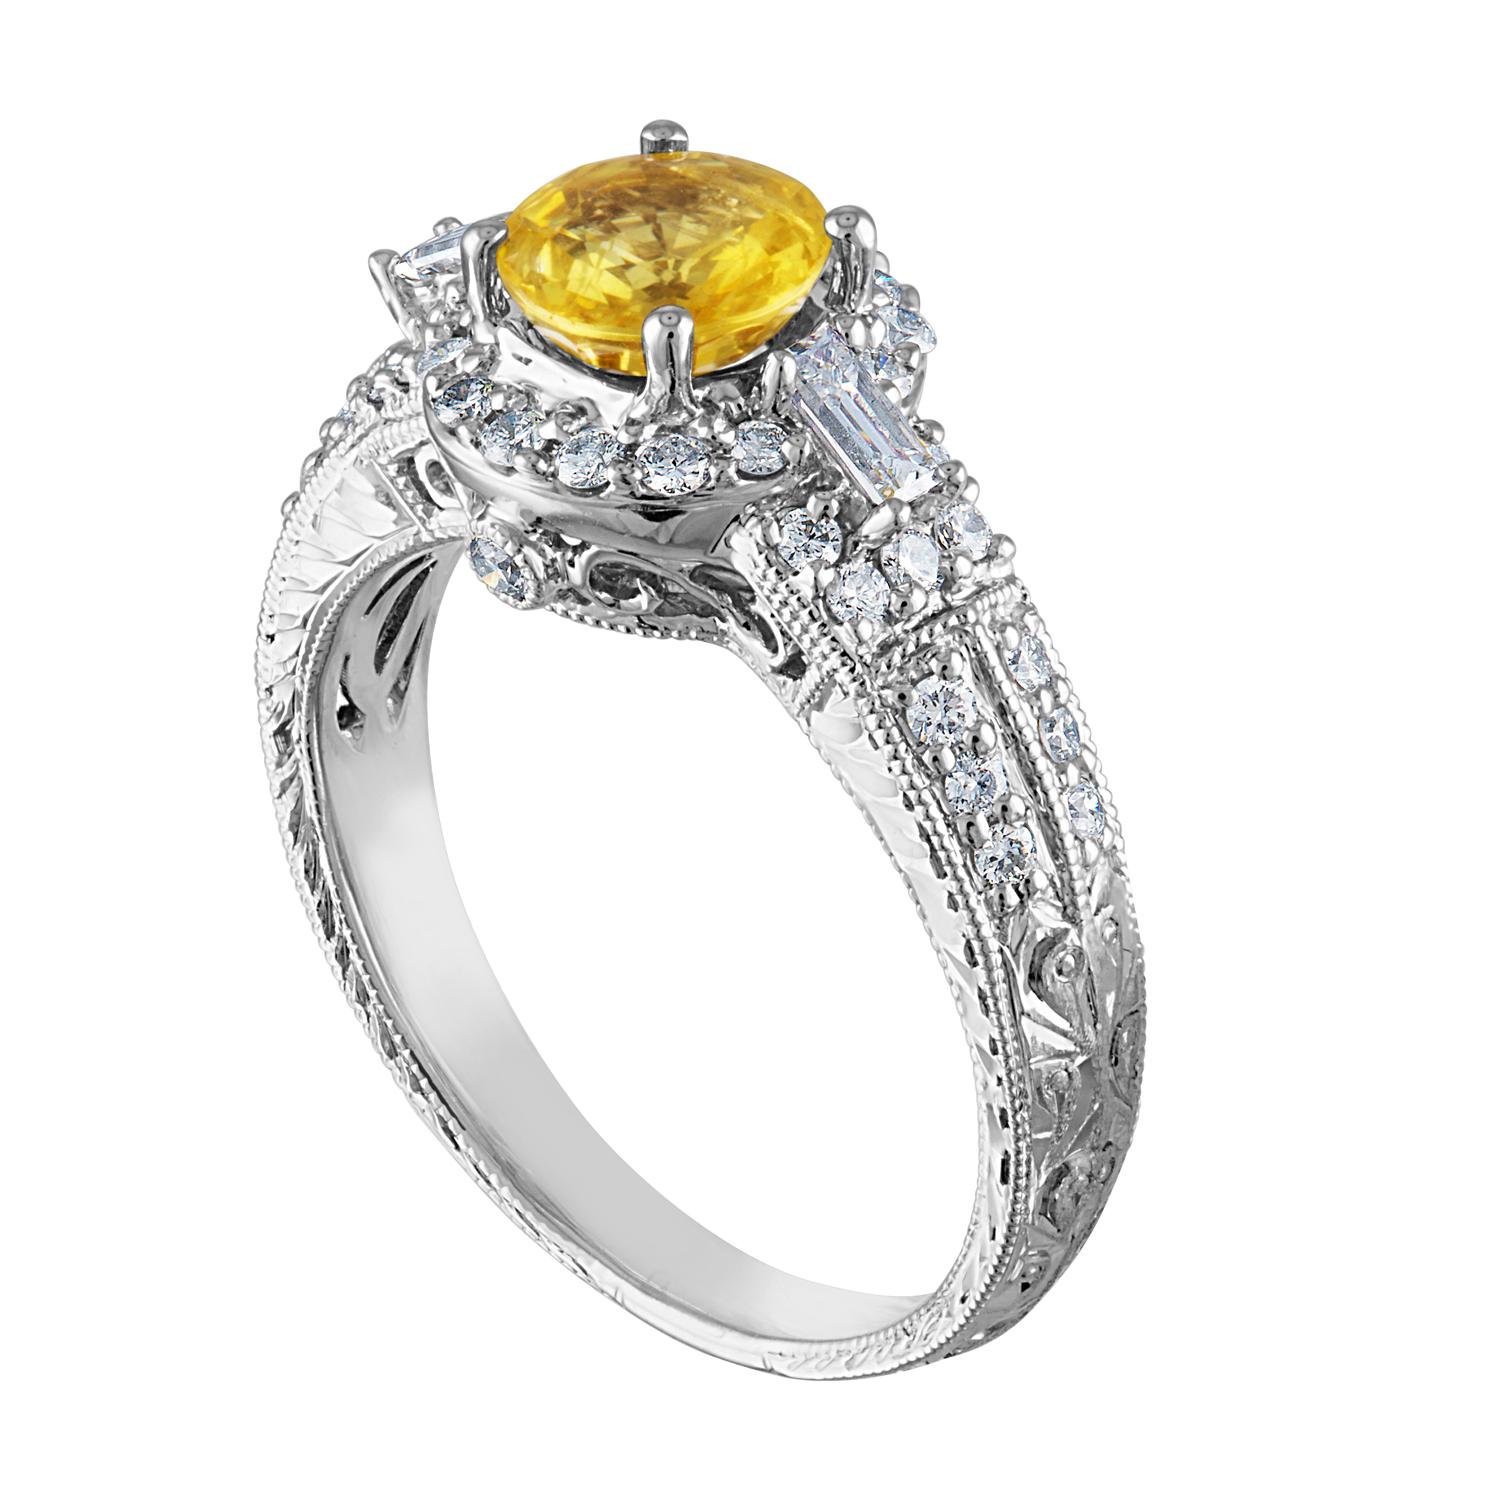 Beautiful Art Deco Revival Round Halo Milgrain Filigree Ring
The ring is 18K White Gold
The Center Stone is a Round Yellow Sapphire 1.05 Carats
The Sapphire is AGL Certified Heated
There are 0.45 Carats in Diamonds F/G VS/SI
The ring is a size 5.50,